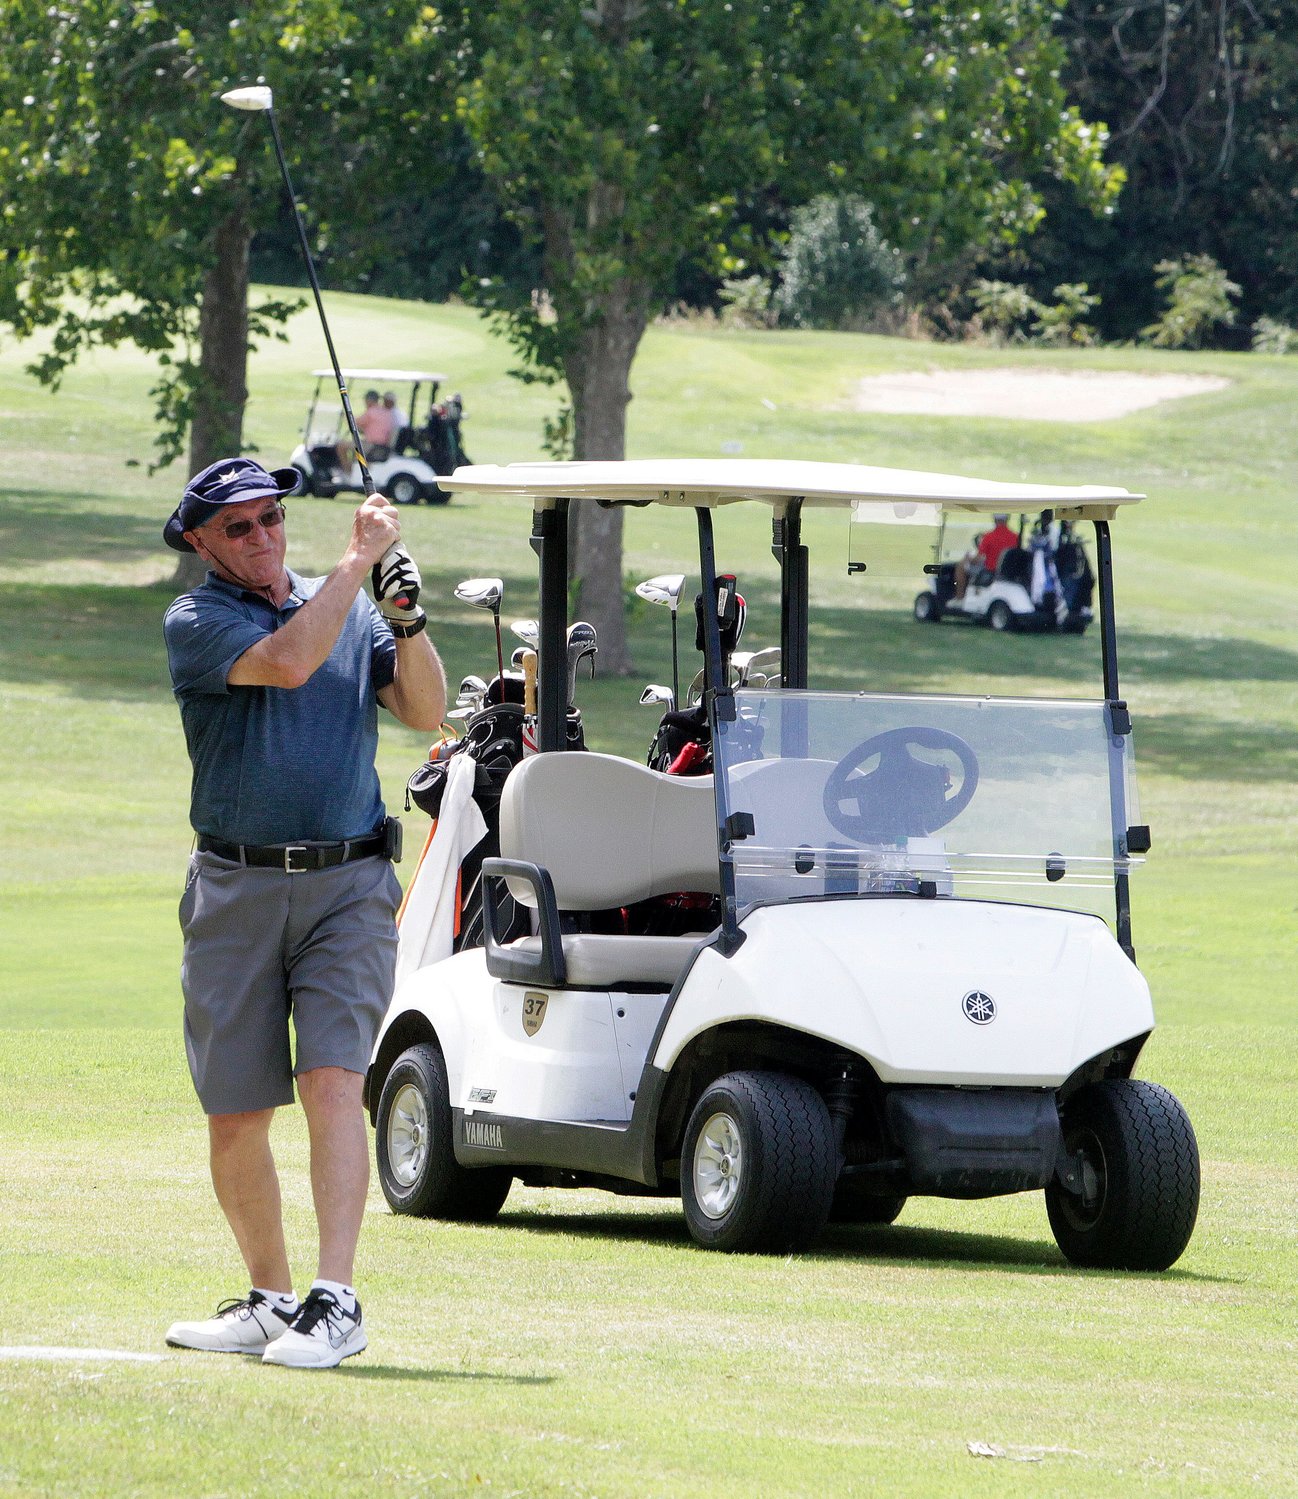 Charlie Fulks of Moberly follows through with his swing on a shot place toward Hole No. 2, Monday, Aug. 30 at Heritage Hills Golf Course. Fulks was among golfers from 28 4-person teams that took part in Moberly Area Community College's annual Cotton Fitzsimmons Memorial Golf Tournament. The event is a major fundraiser for MACC Greyhounds men and women's basketball programs.